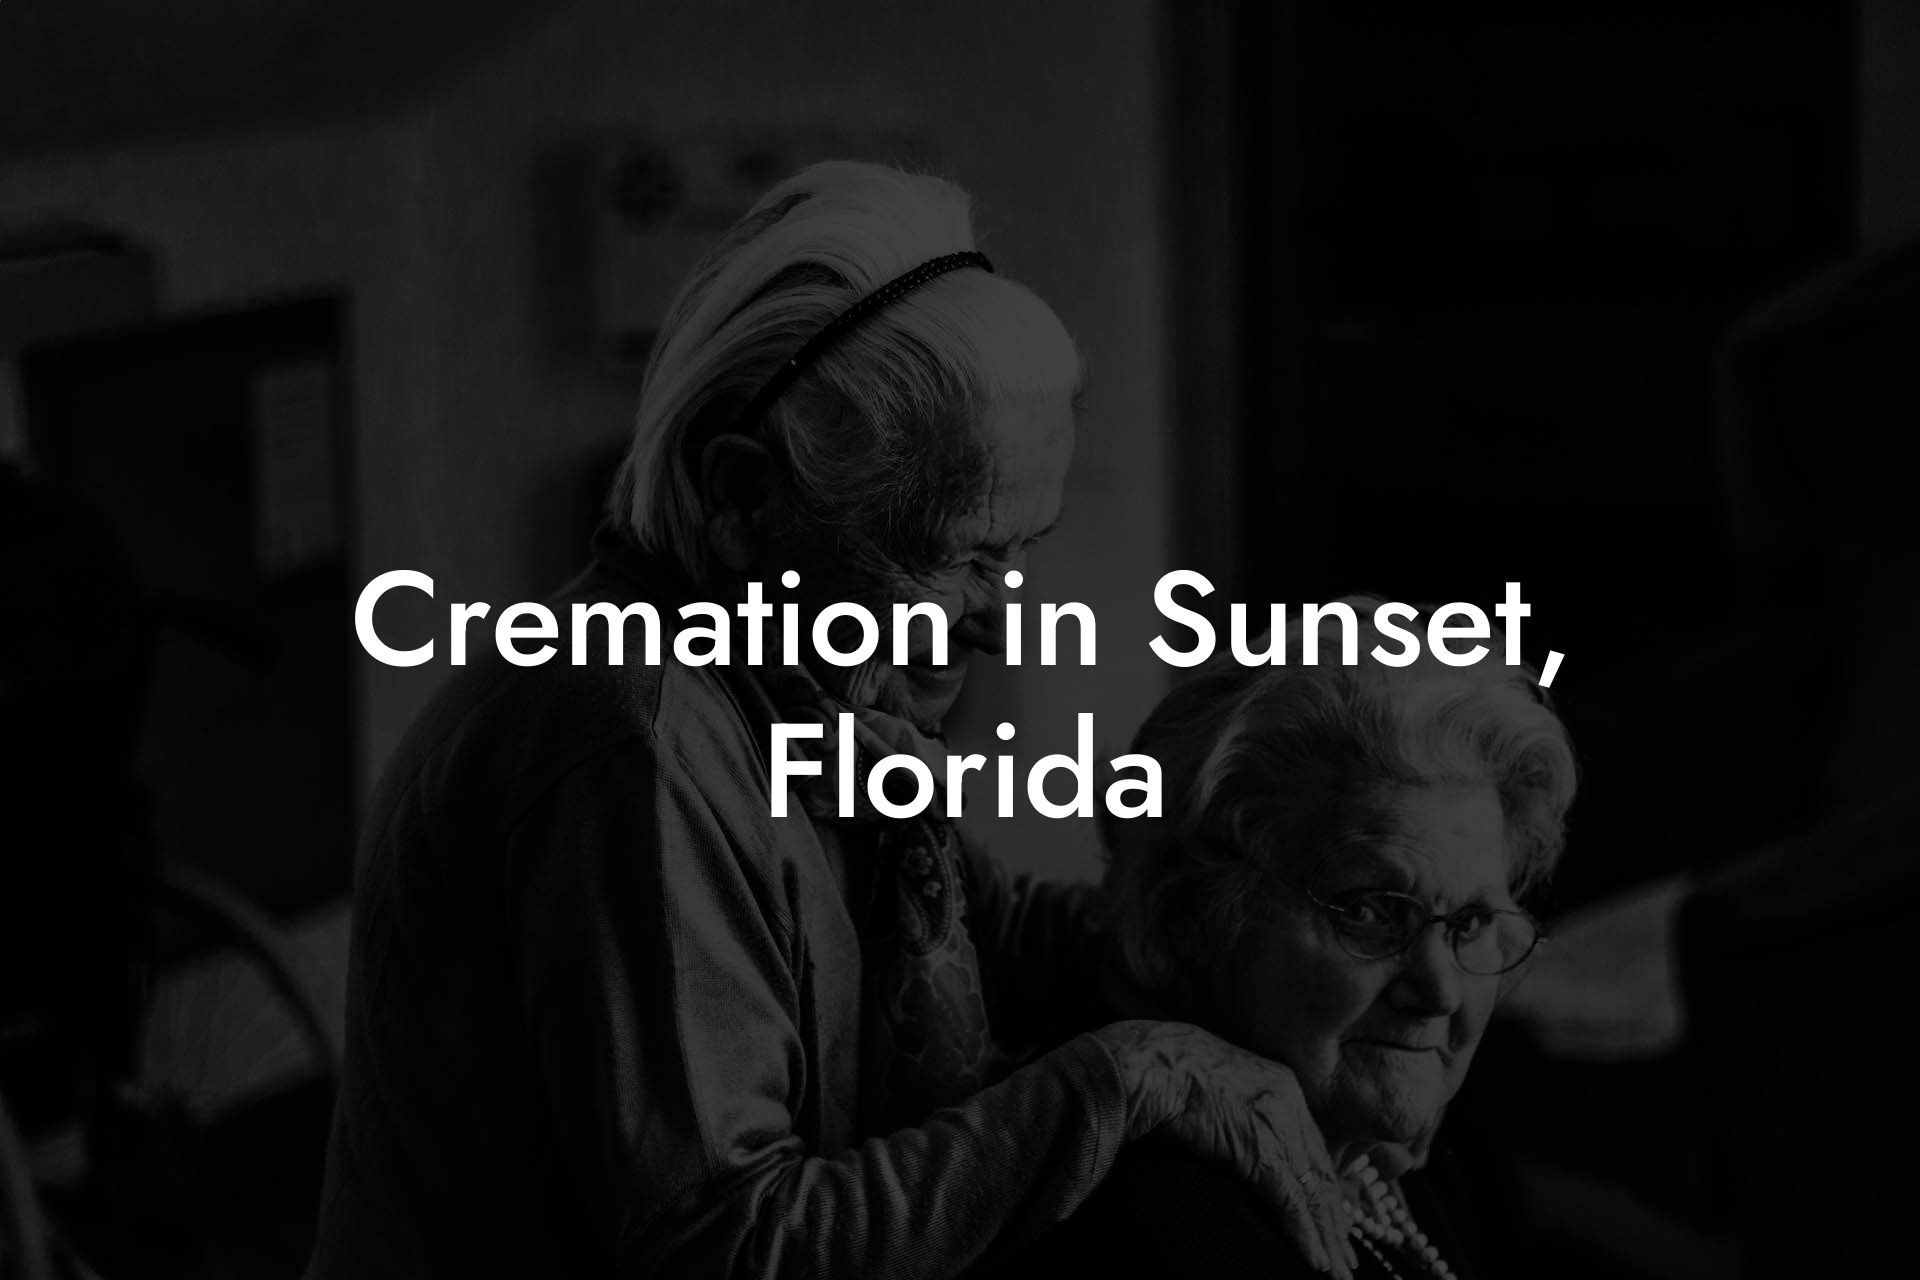 Cremation in Sunset, Florida